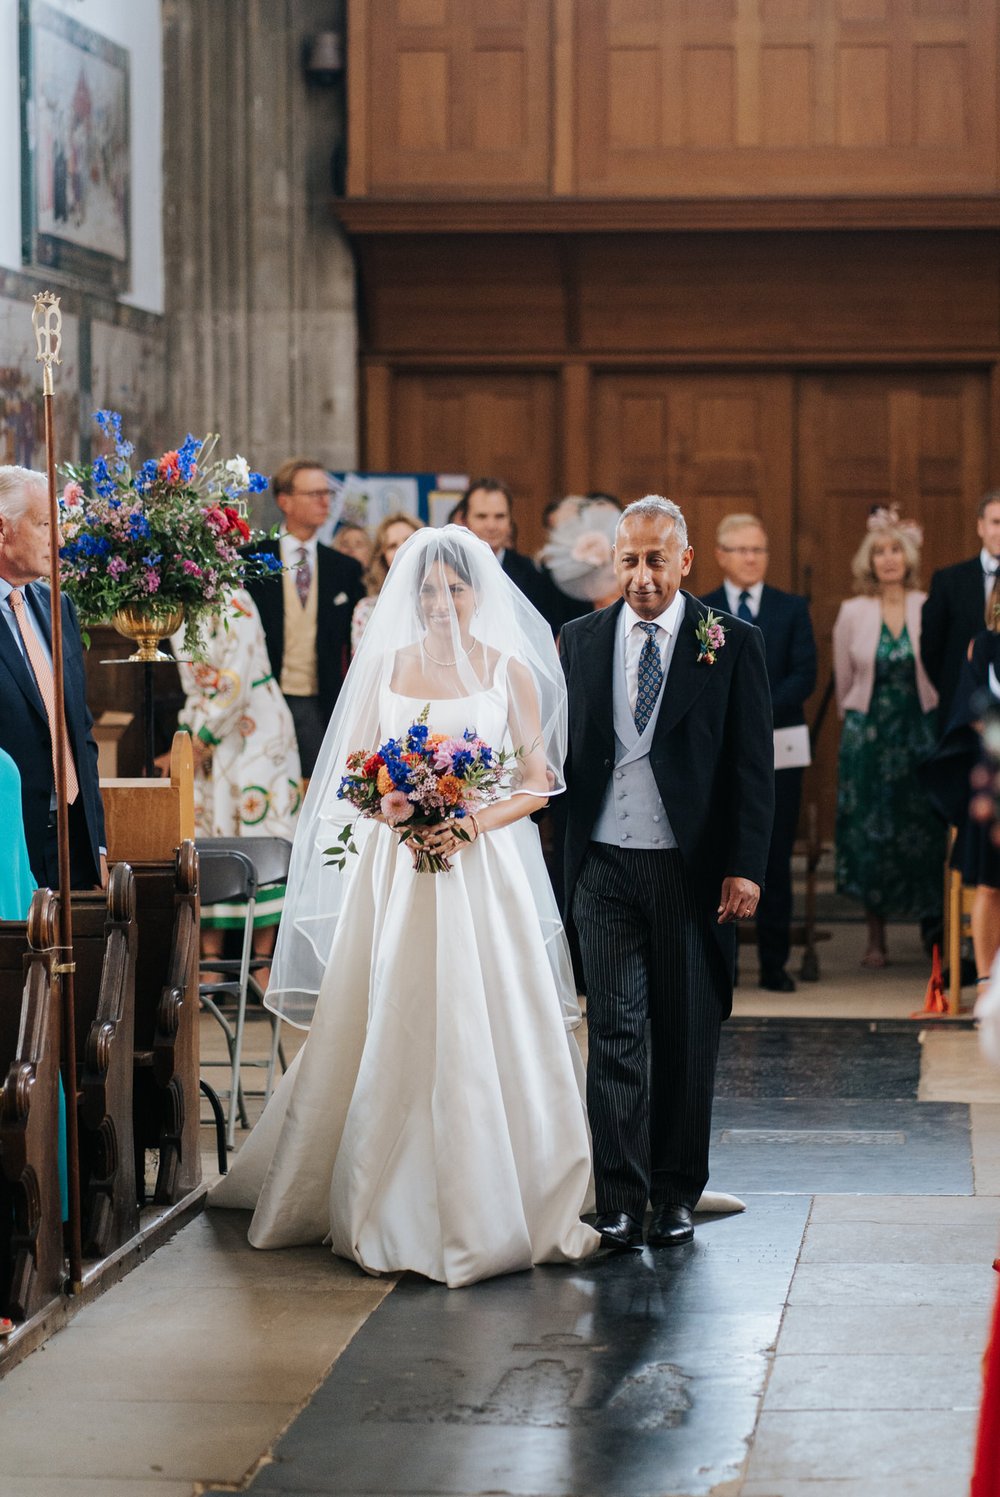 Bride, covered in veil, walks down the aisle with her father